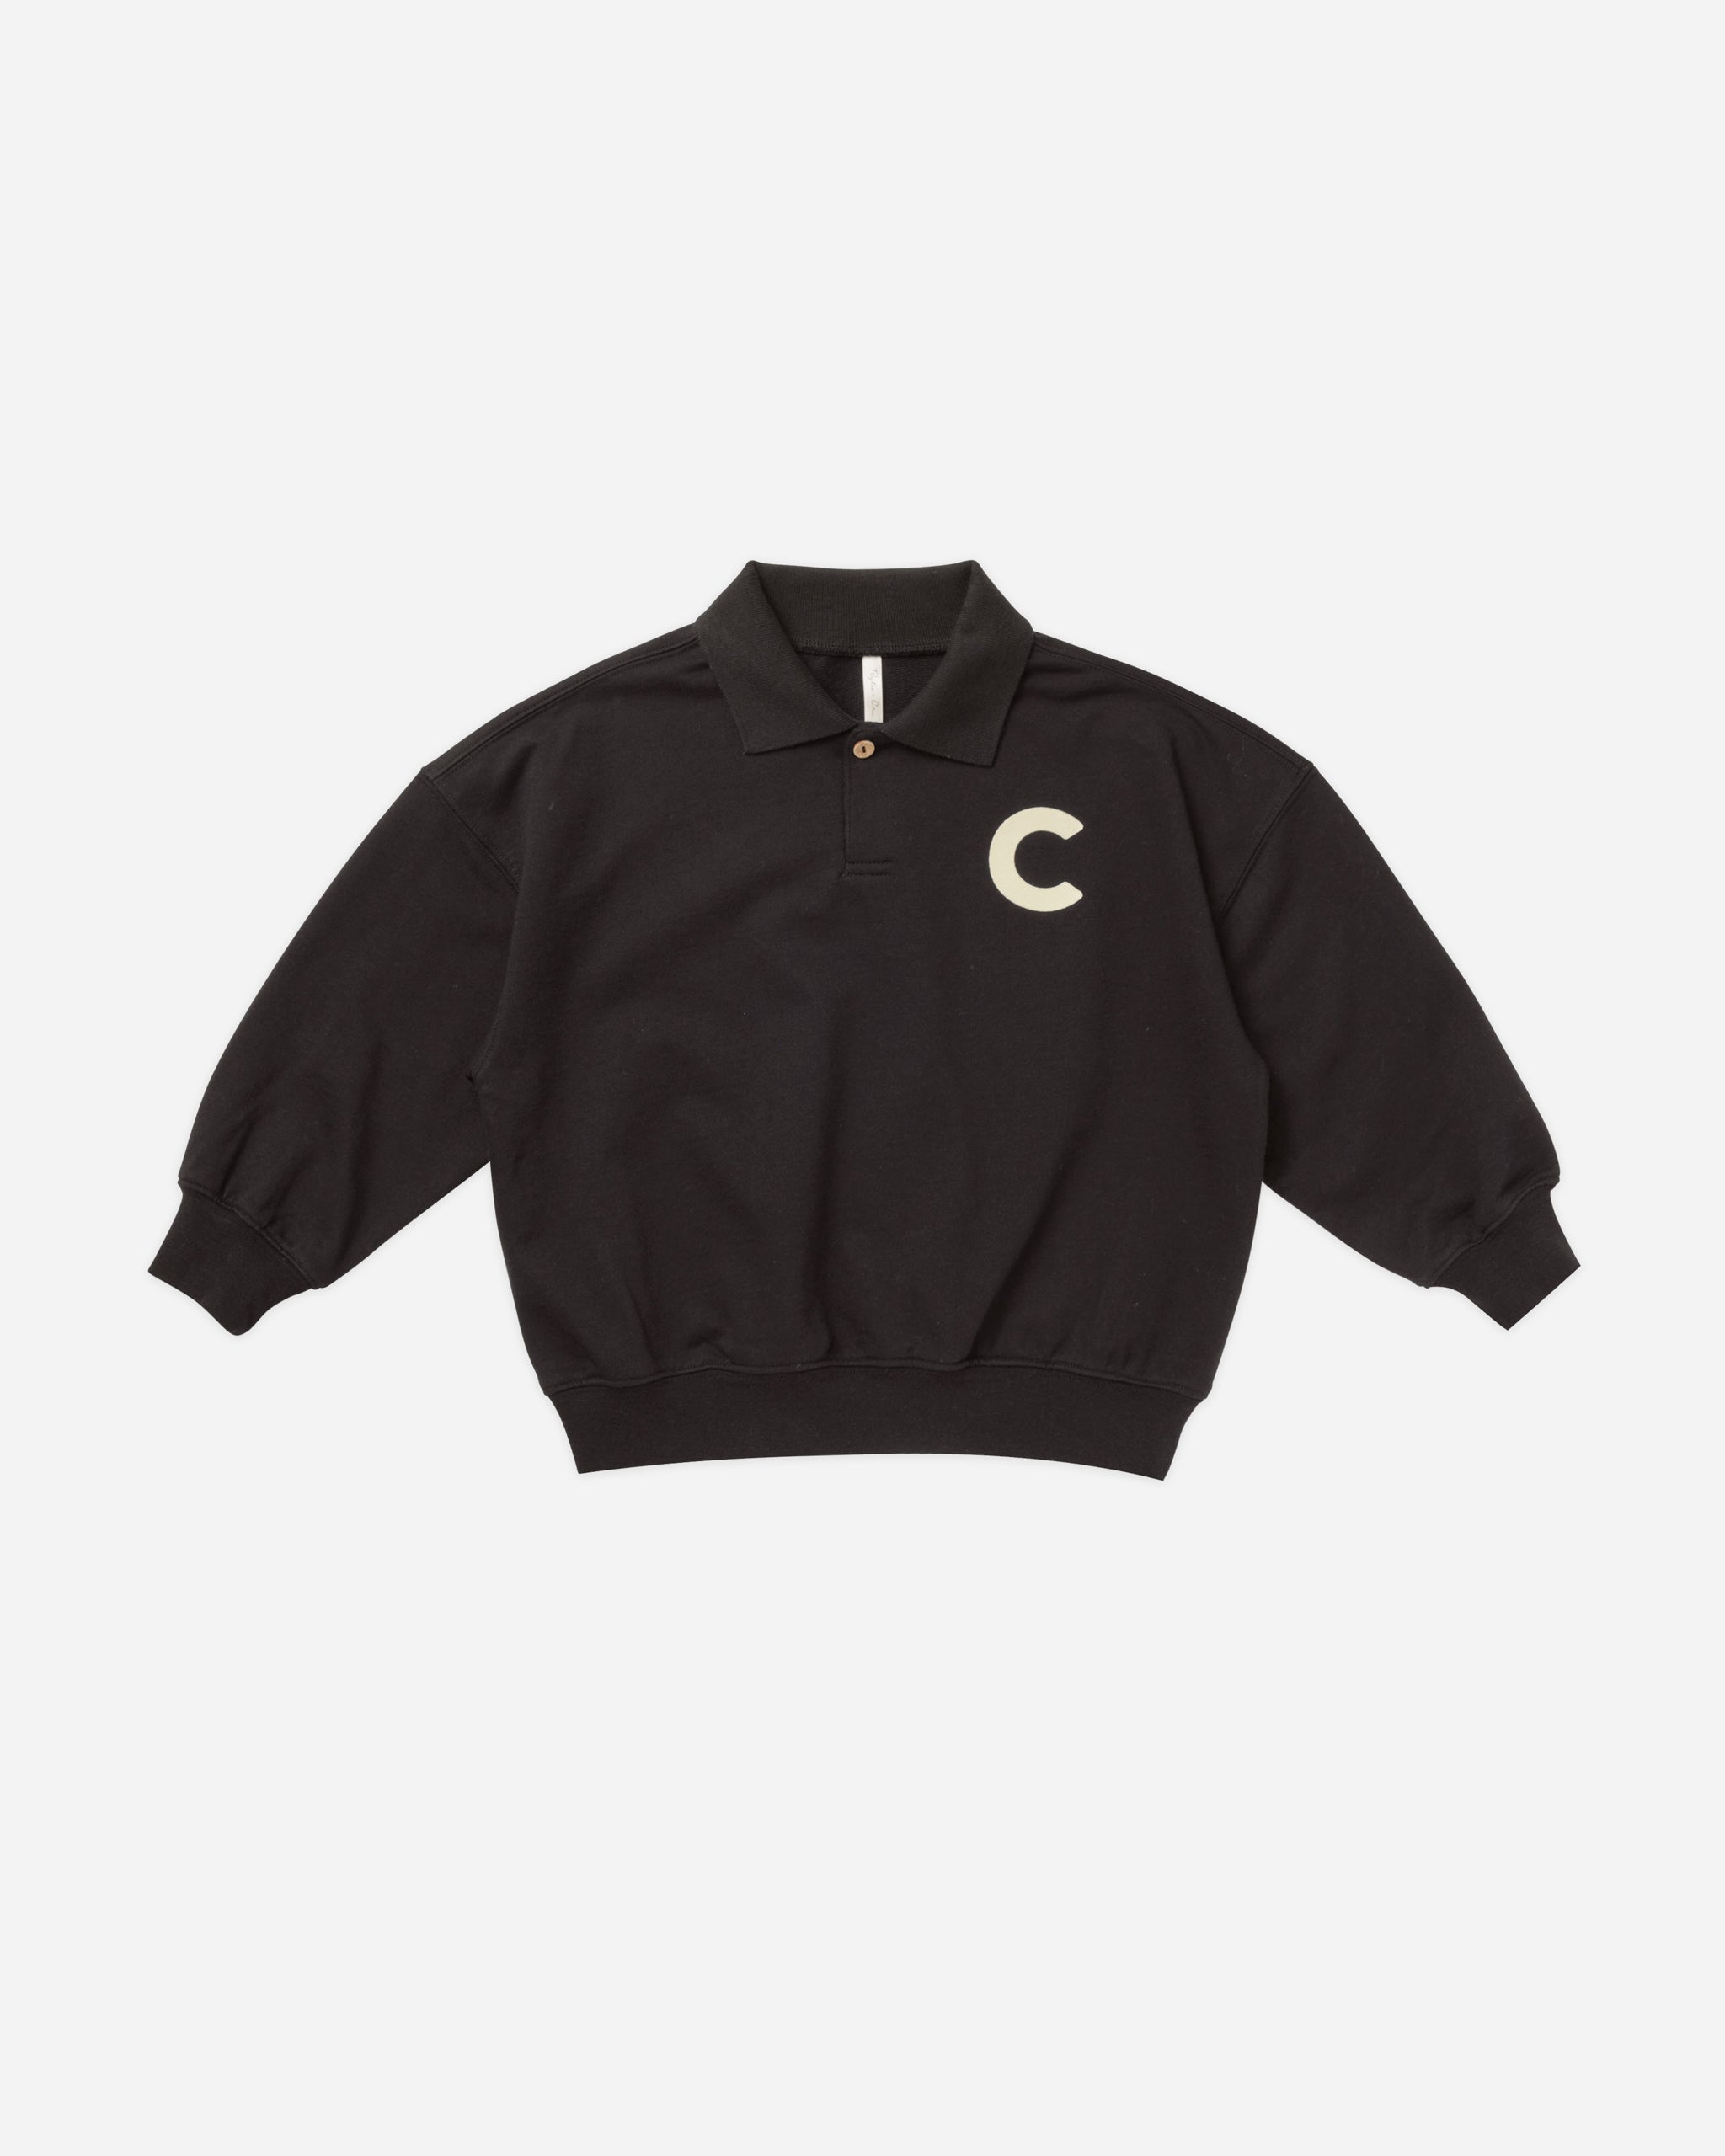 Collared Sweatshirt || Black - Rylee + Cru | Kids Clothes | Trendy Baby Clothes | Modern Infant Outfits |